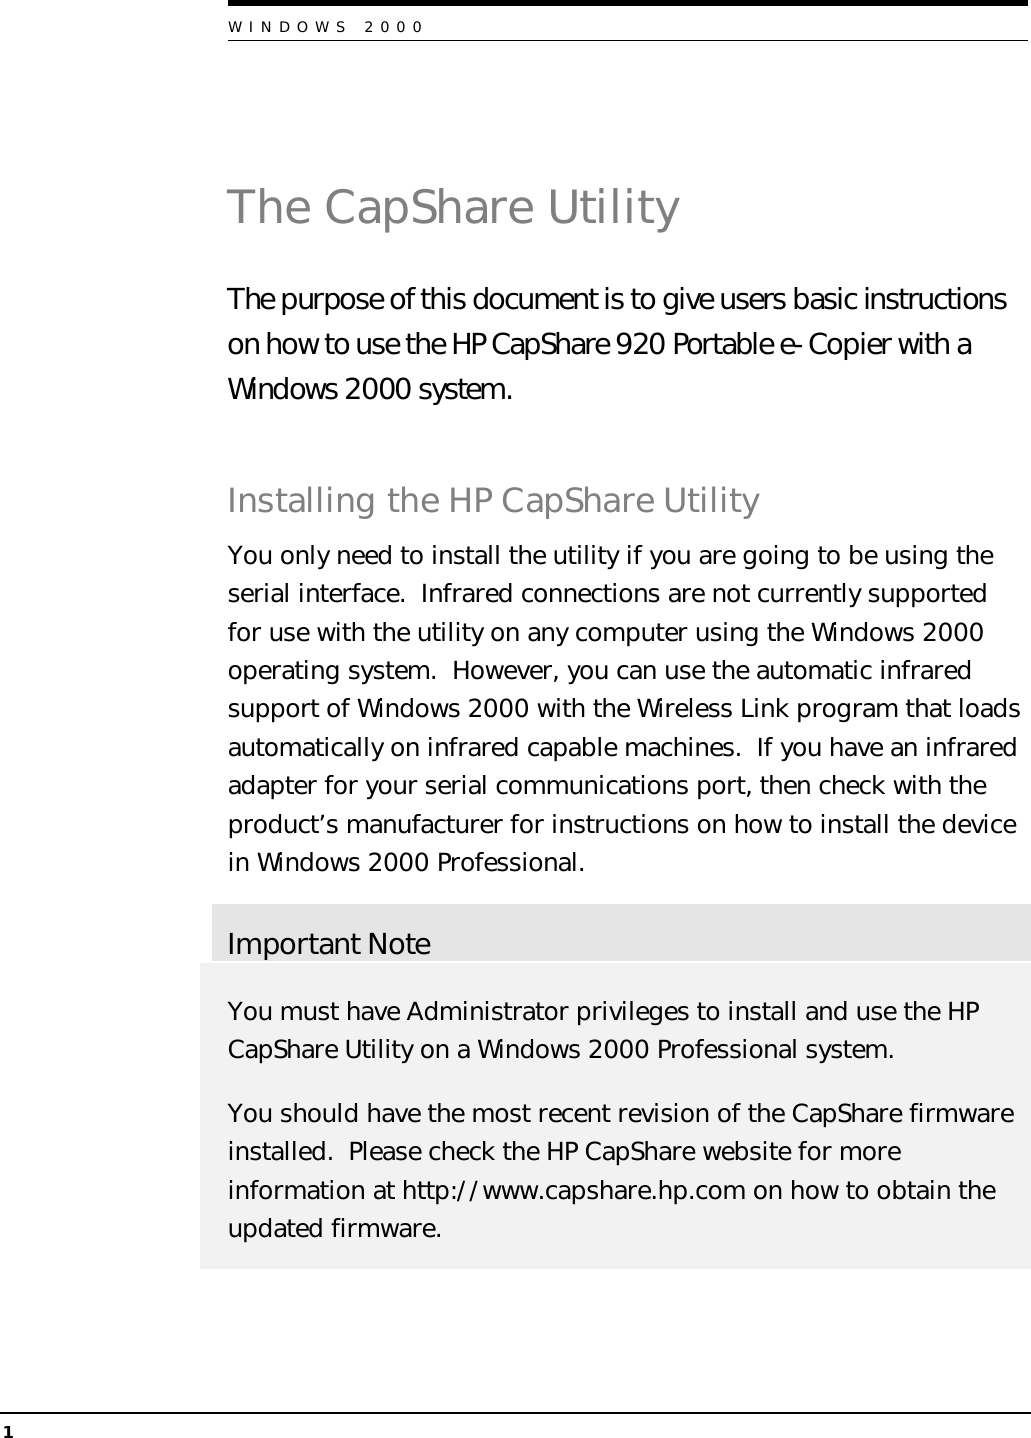 Page 2 of 9 - HP Win 2K Capshare User's Guide Cap Share 920 Portable E-Copier - Windows 2000 Guide, Not Orderable Bps80163